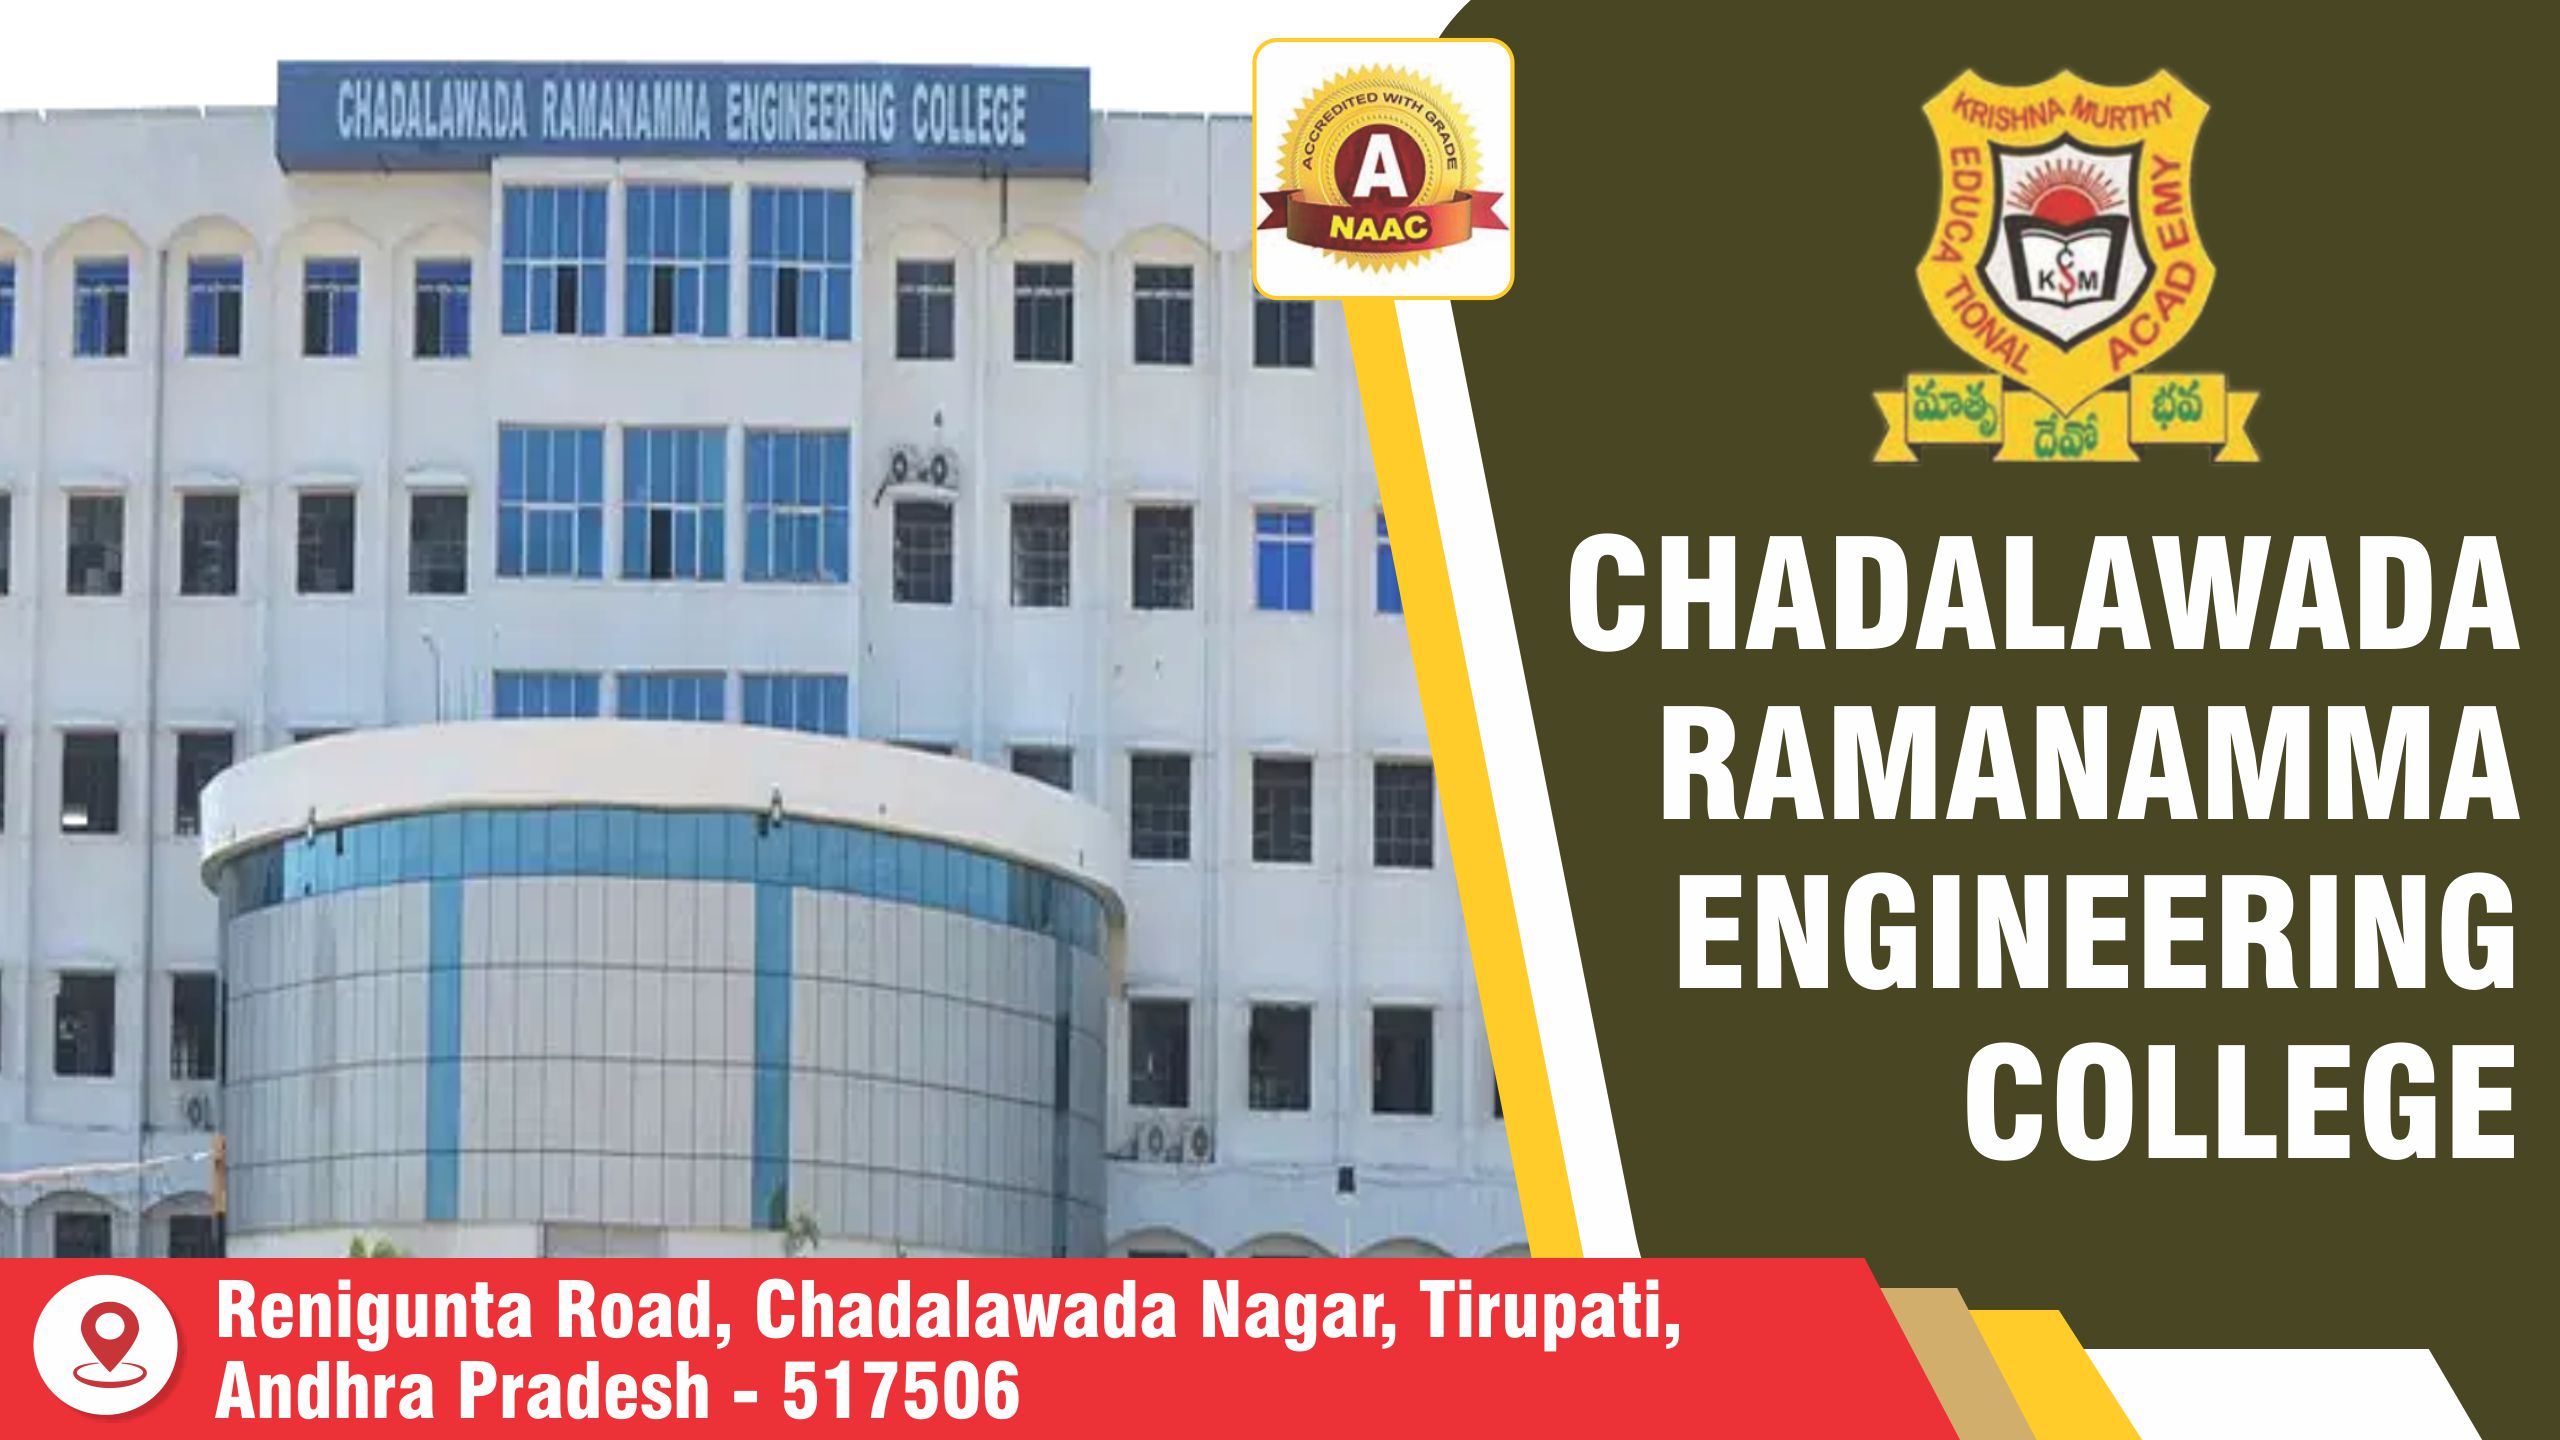 Out Side View of Chadalawada Ramanamma Engineering College